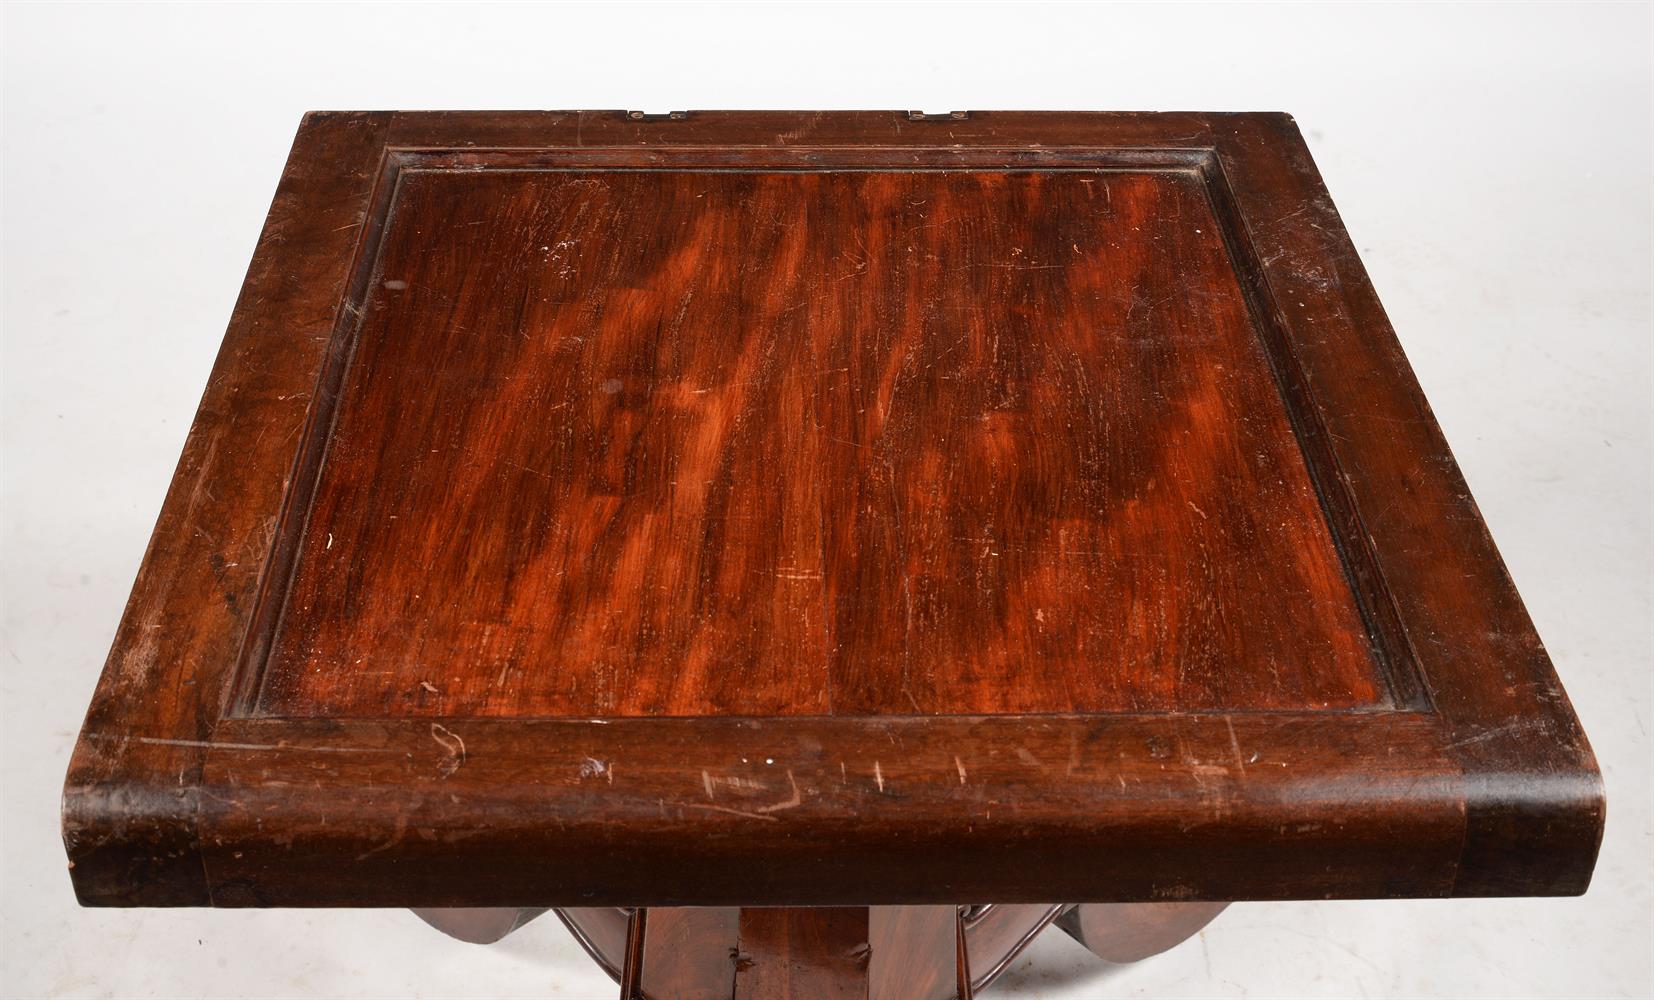 A WILLIAM IV MAHOGANY CIRCULAR CONCENTRIC EXTENDING DINING TABLE, CIRCA 1835 - Image 4 of 6